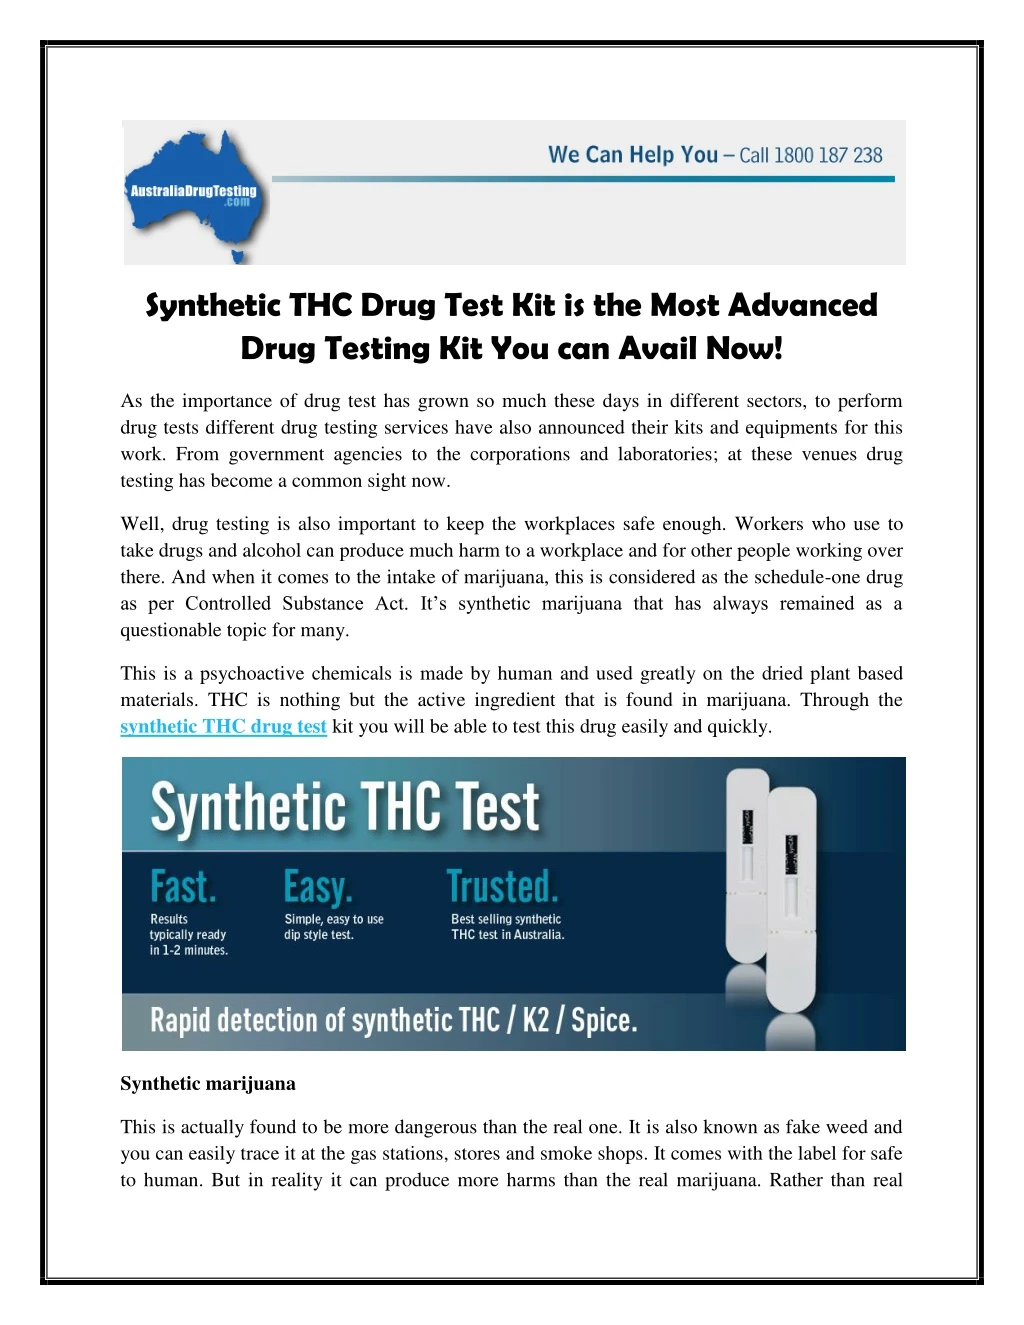 synthetic thc drug test kit is the most advanced